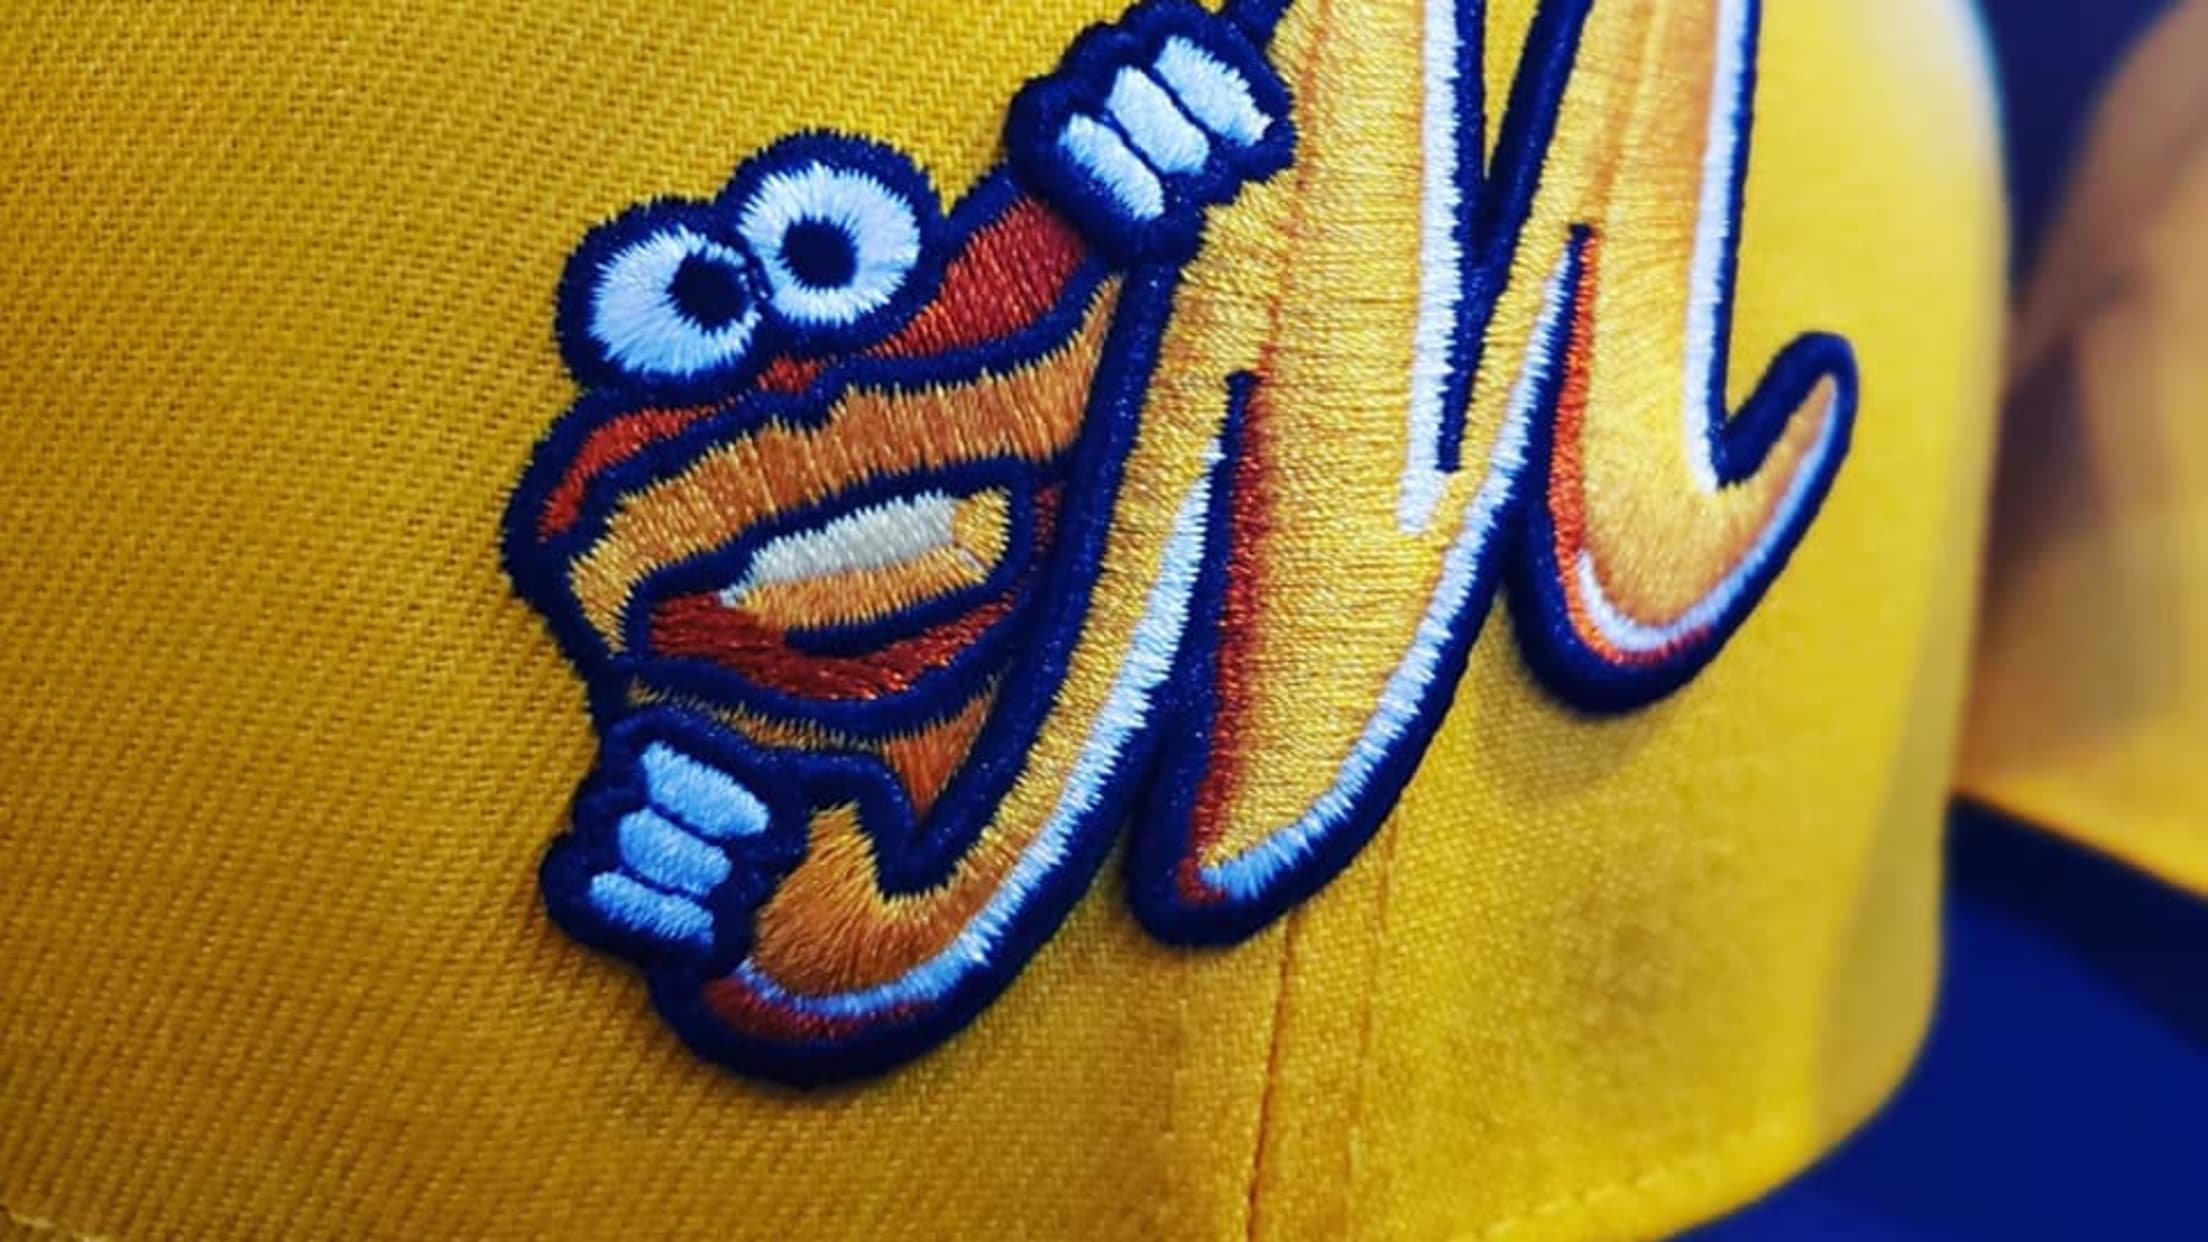 Montgomery Biscuits Announce Extension with Tampa Bay Rays, Unveil